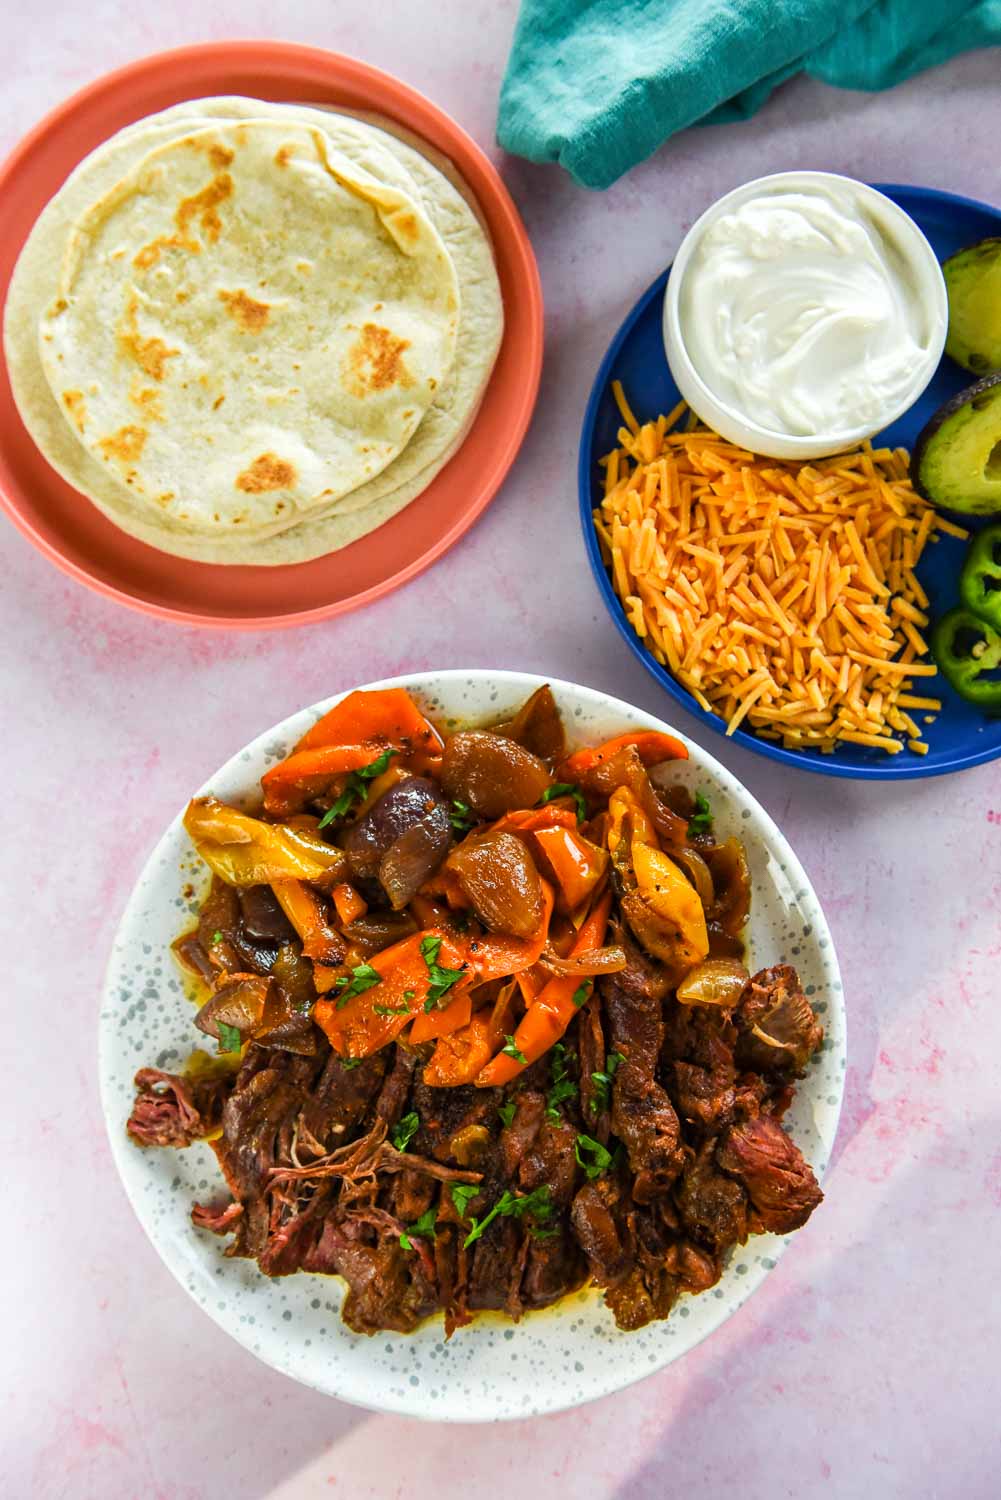 white with blue speckles plate with sliced fajita steak and veggies next to blue plate with cheese and sour cream and coral plate with tortillas